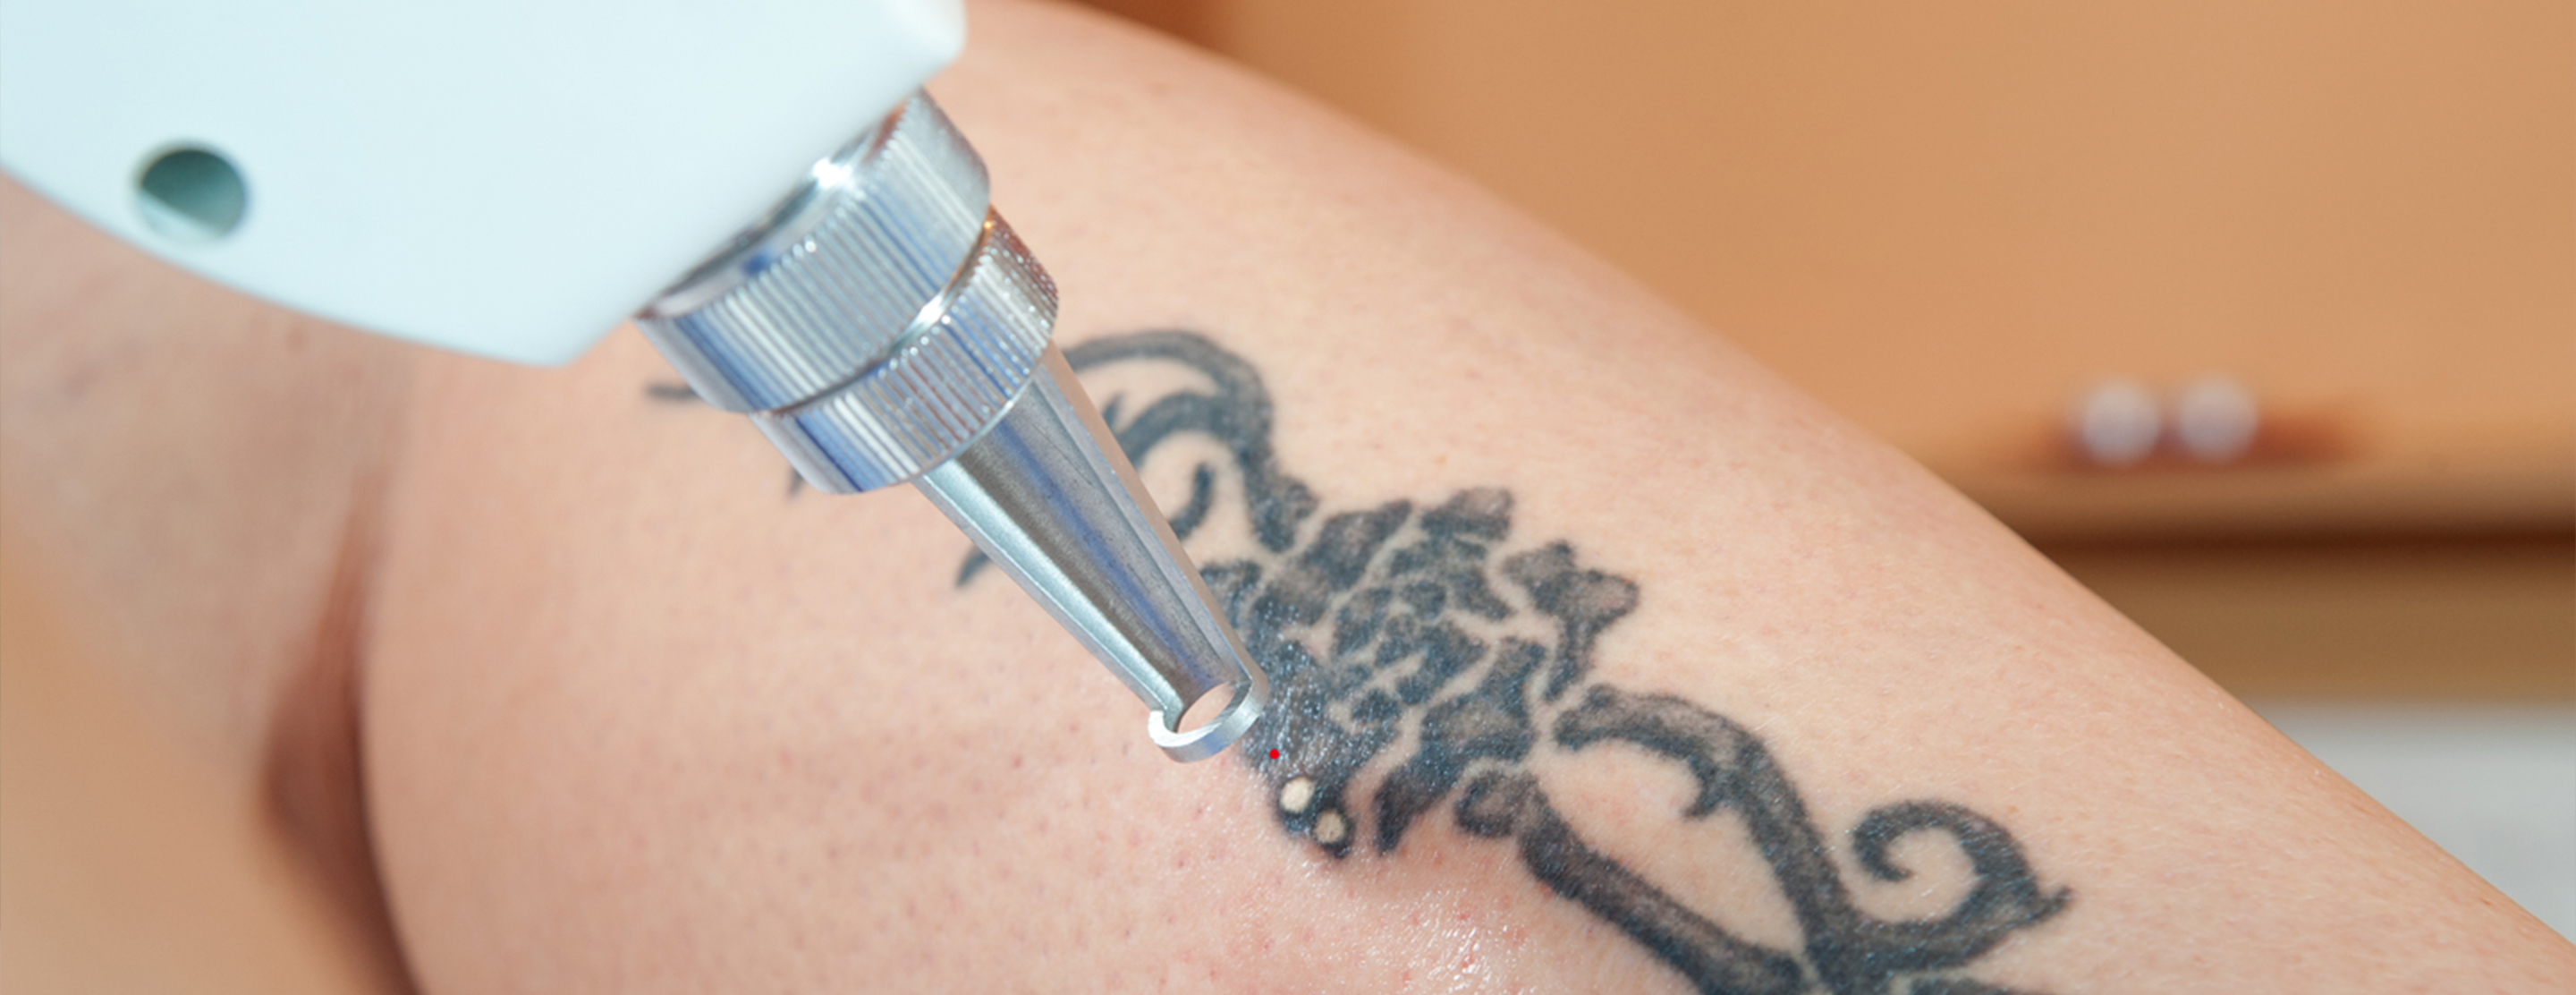 Laser Tattoo Removal | Conditions & Treatments | UCSF Health